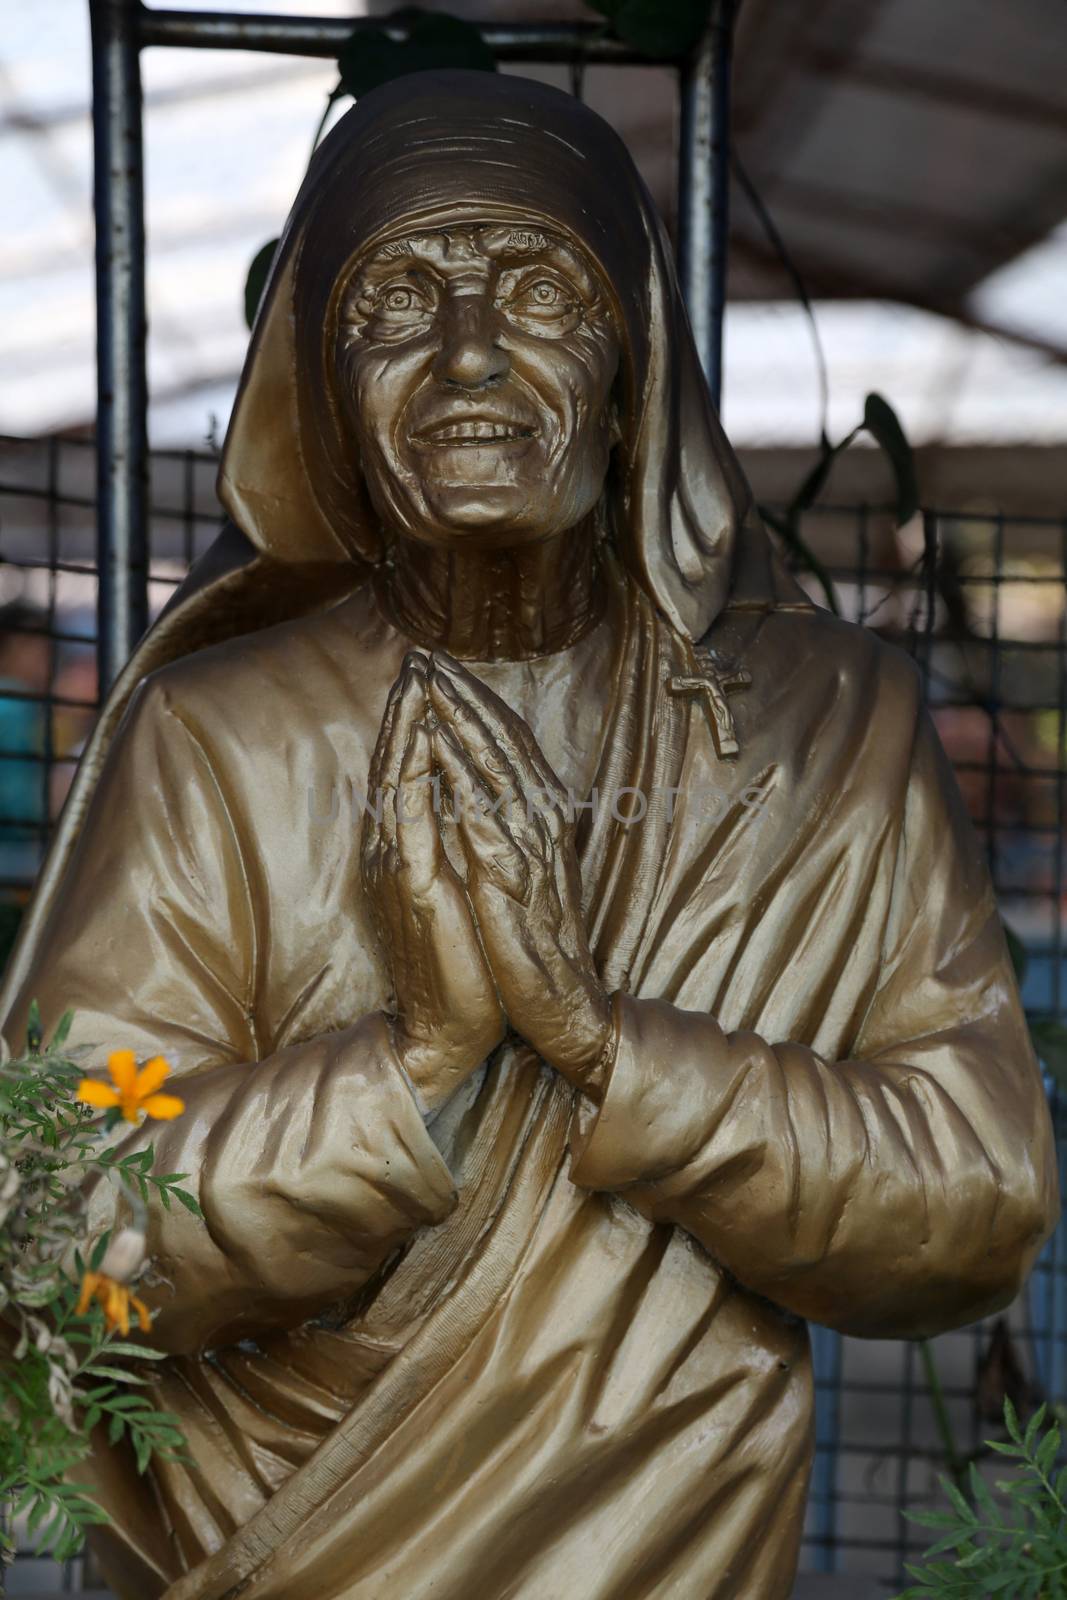 Statue of Mother Teresa, Prem Dan, one of the houses established by Mother Teresa and run by the Missionaries of Charity in Kolkata, India